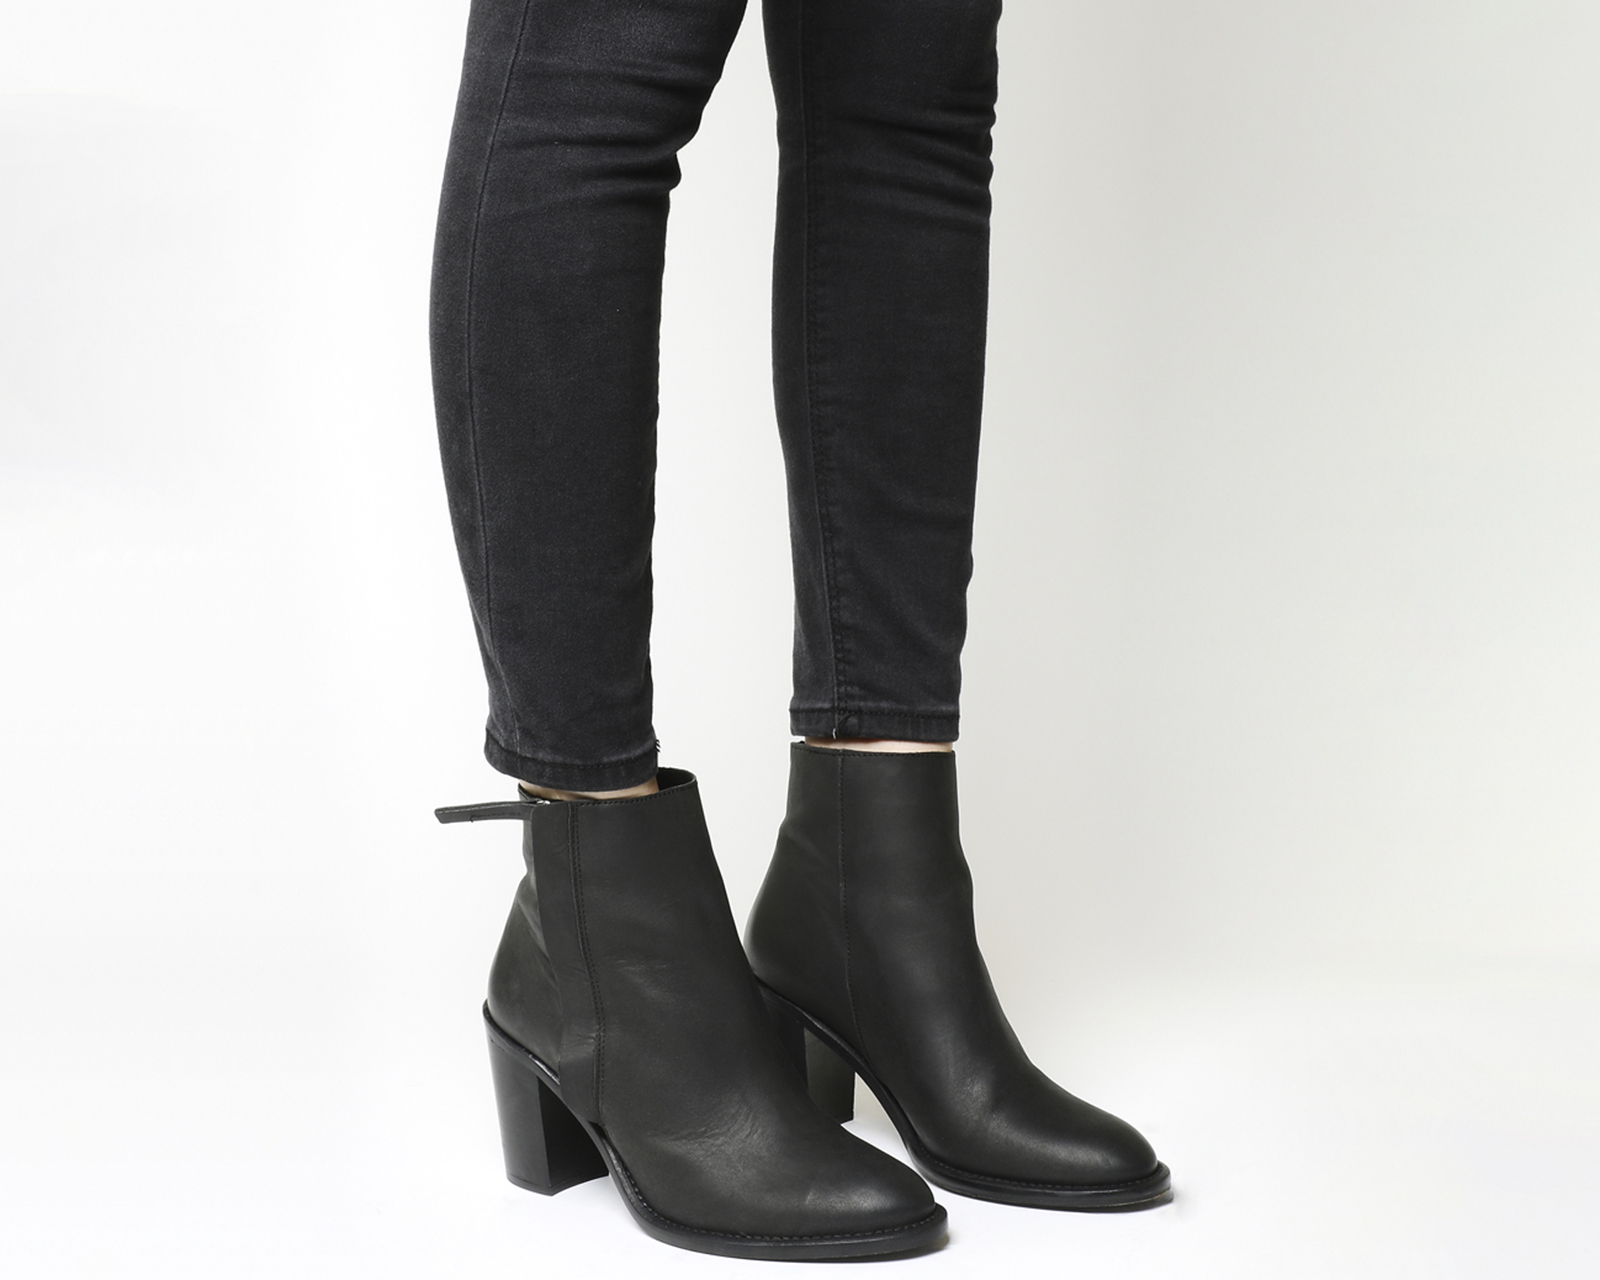 OFFICE Legend Side Zip Boot Black Leather - Women's Ankle Boots